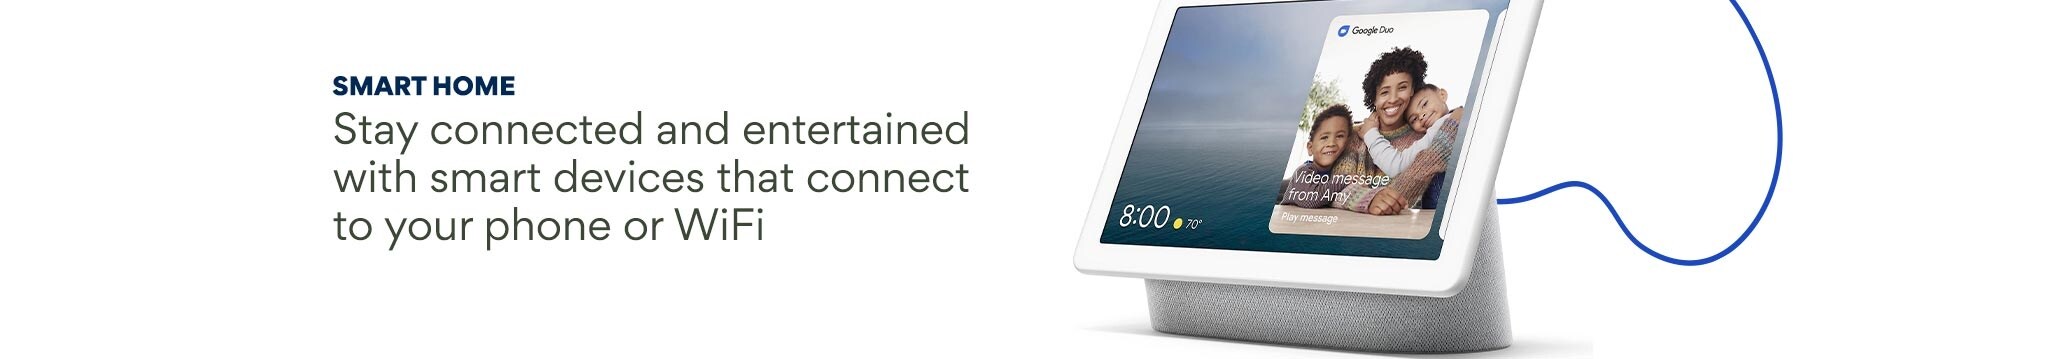 Smart Home. Stay connected and entertained with smart devices that connect to your phone or WiFi.